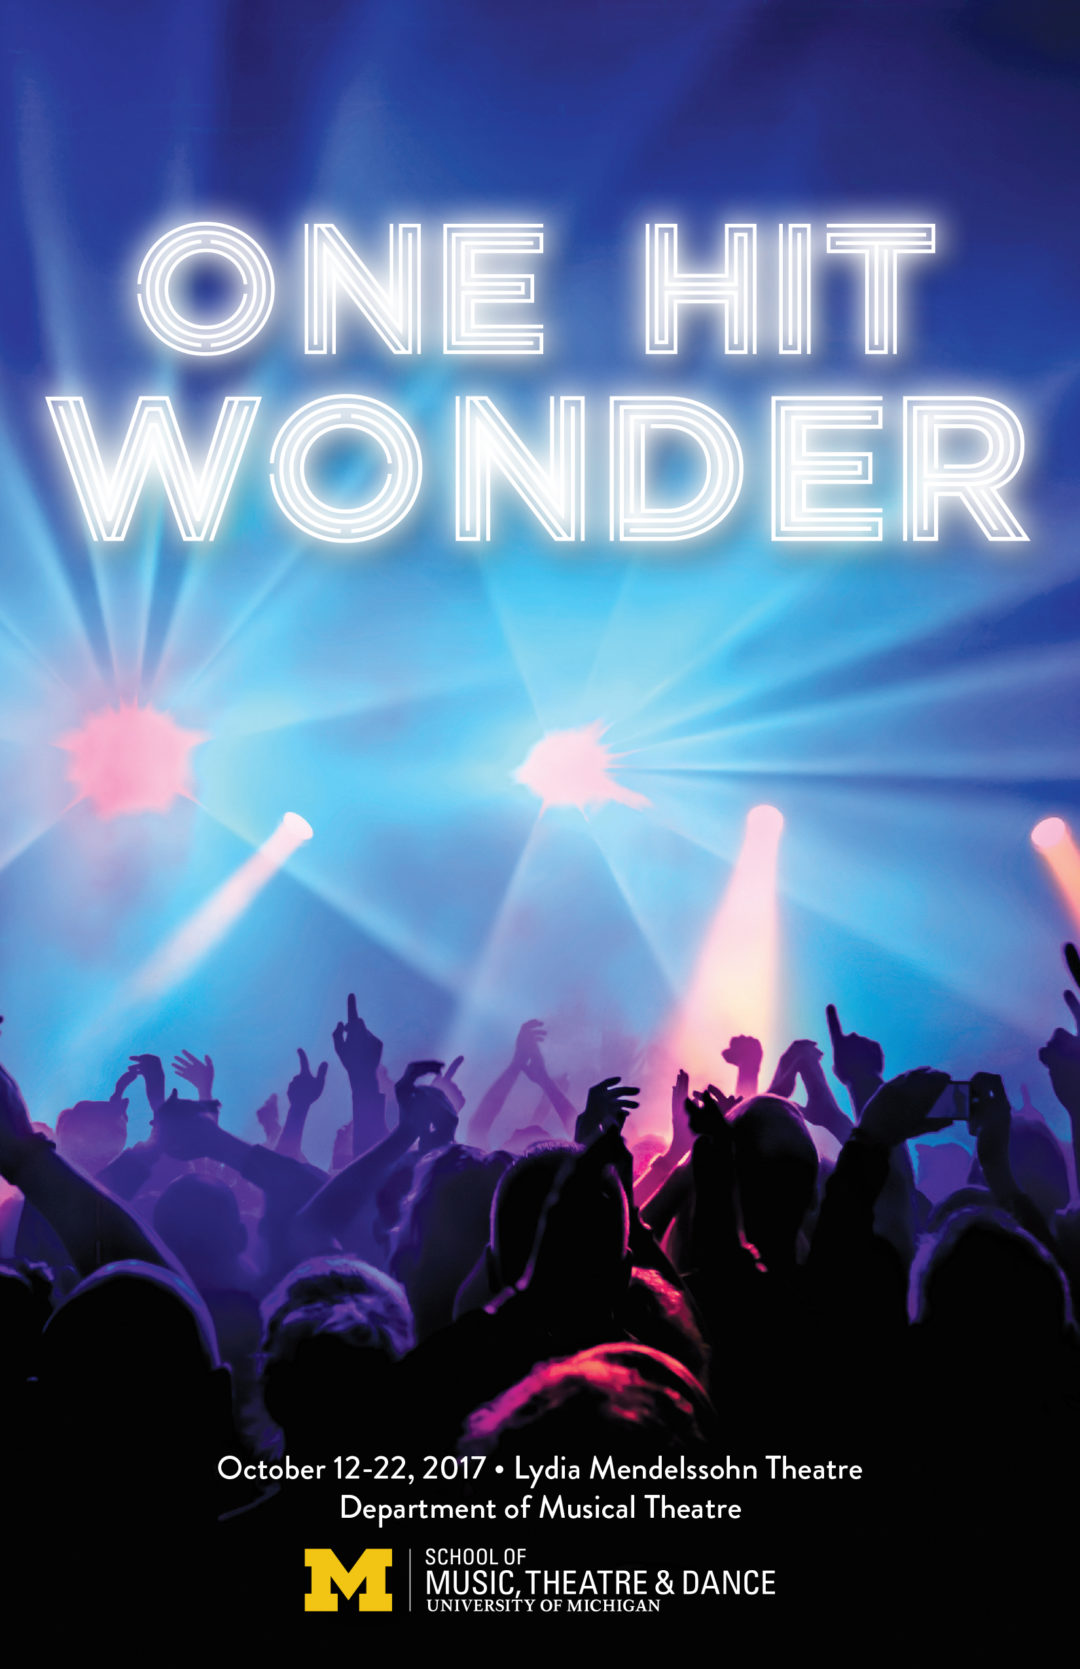 One Hit Wonder Poster  Theatre Artwork & Promotional Material by